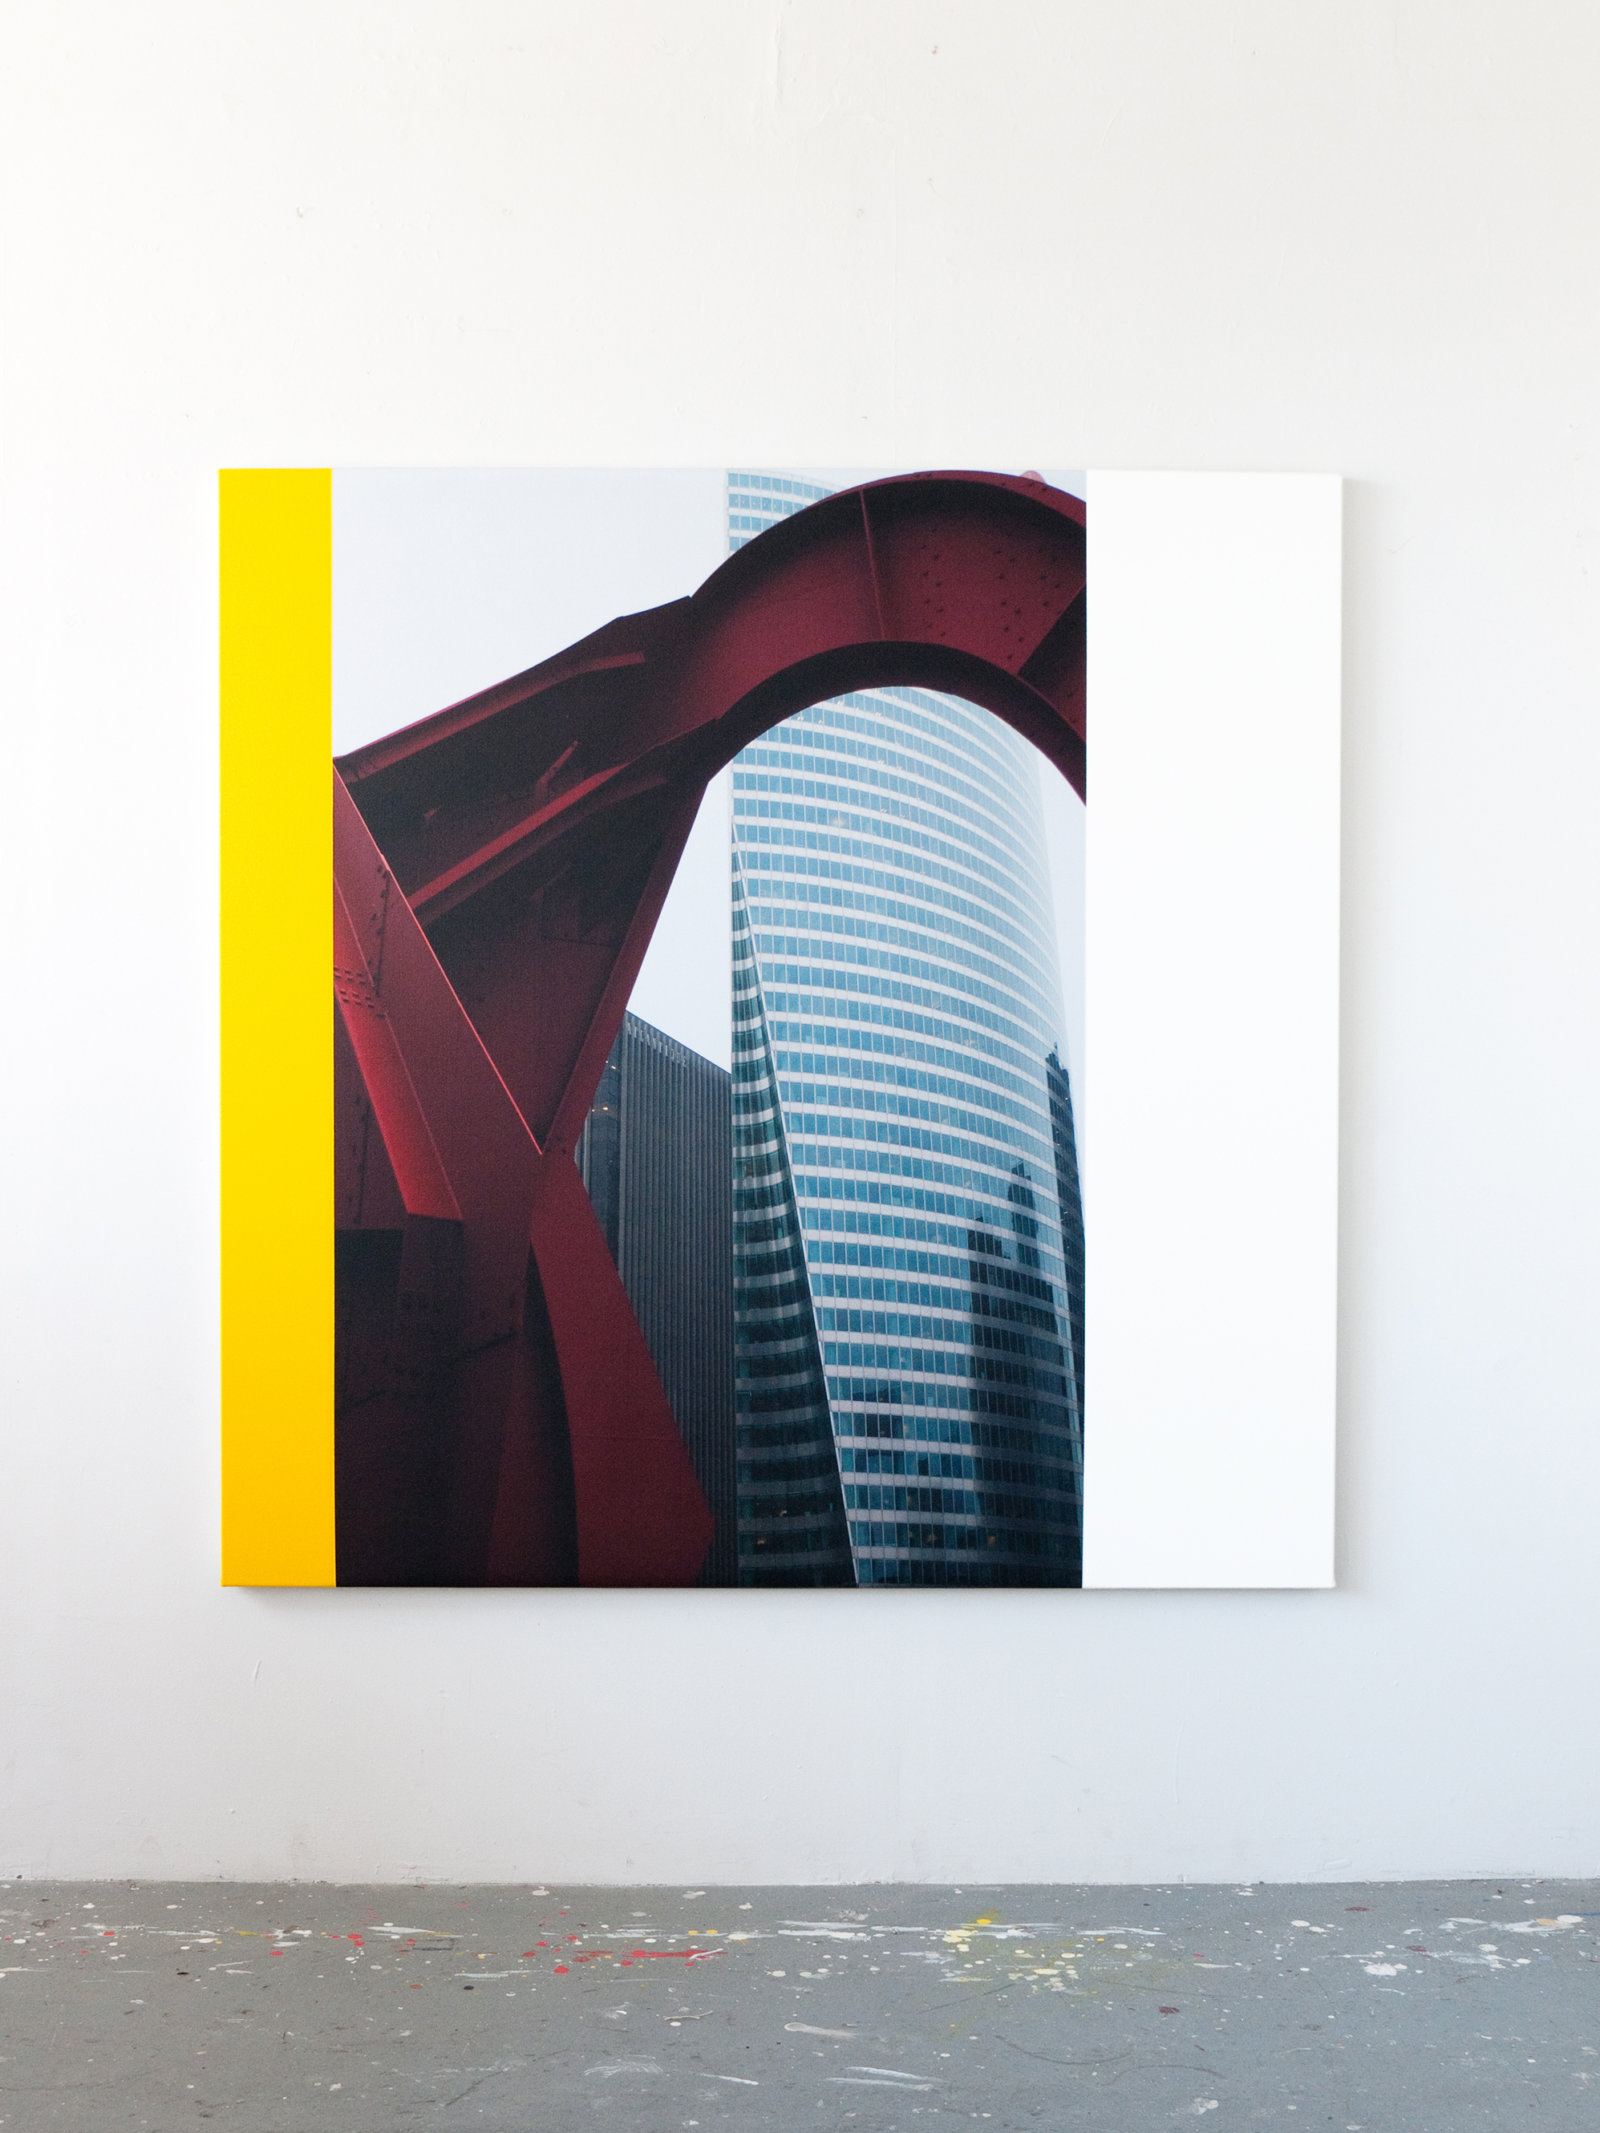 Ian Wallace, Abstract Composition (La Défense, Paris) II, 2011, photolaminate with acrylic on canvas, 60 x 60 in. (152 x 152 cm)